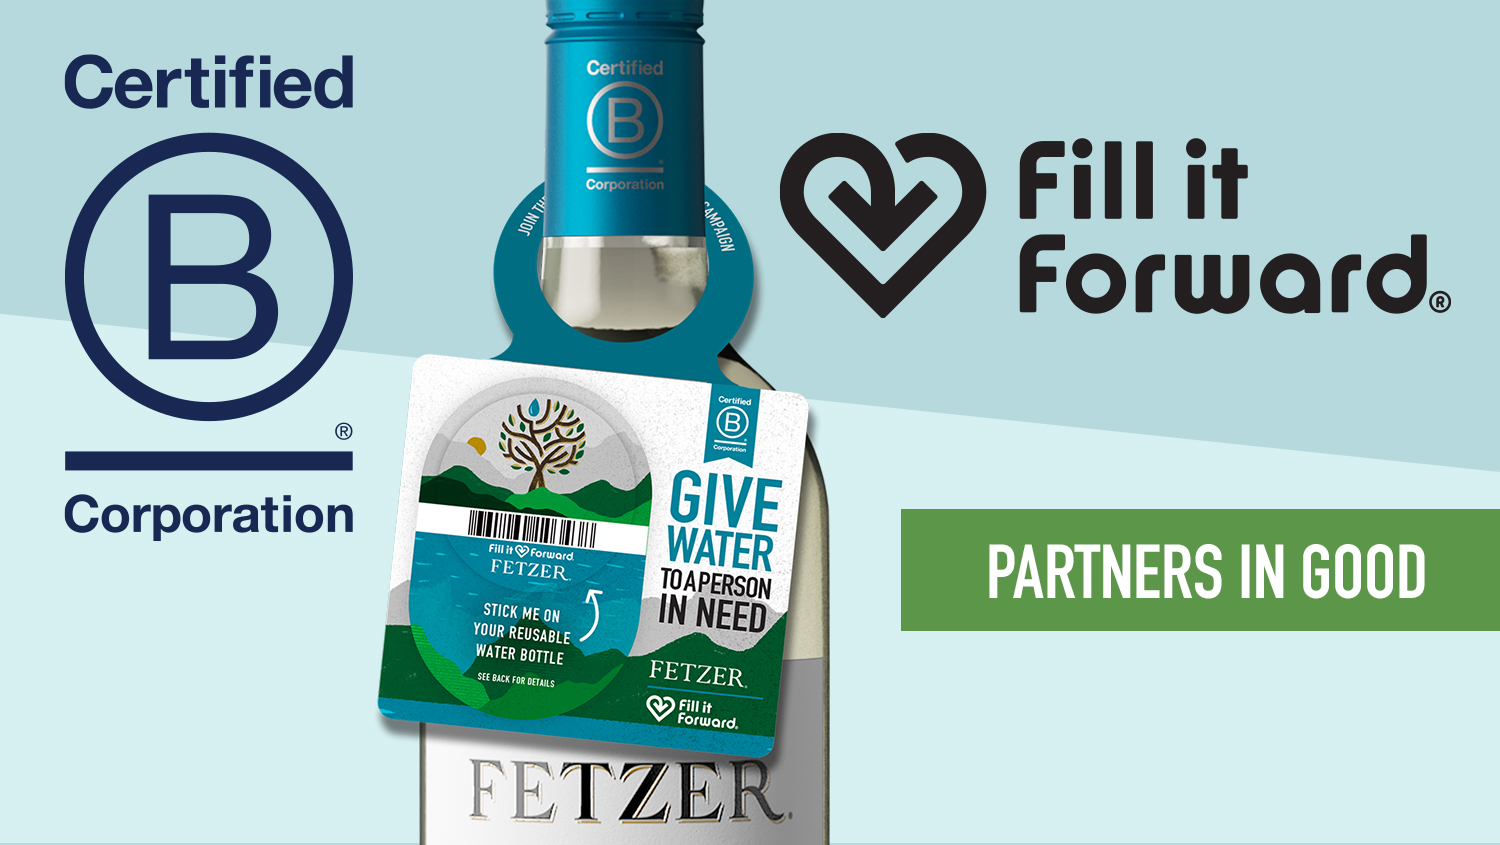 We partner with fellow B Corps and consumers to do still more good in the world! Working with our friends at Fill it Forward, we help to provide communities with clean water and prevent plastic pollution.